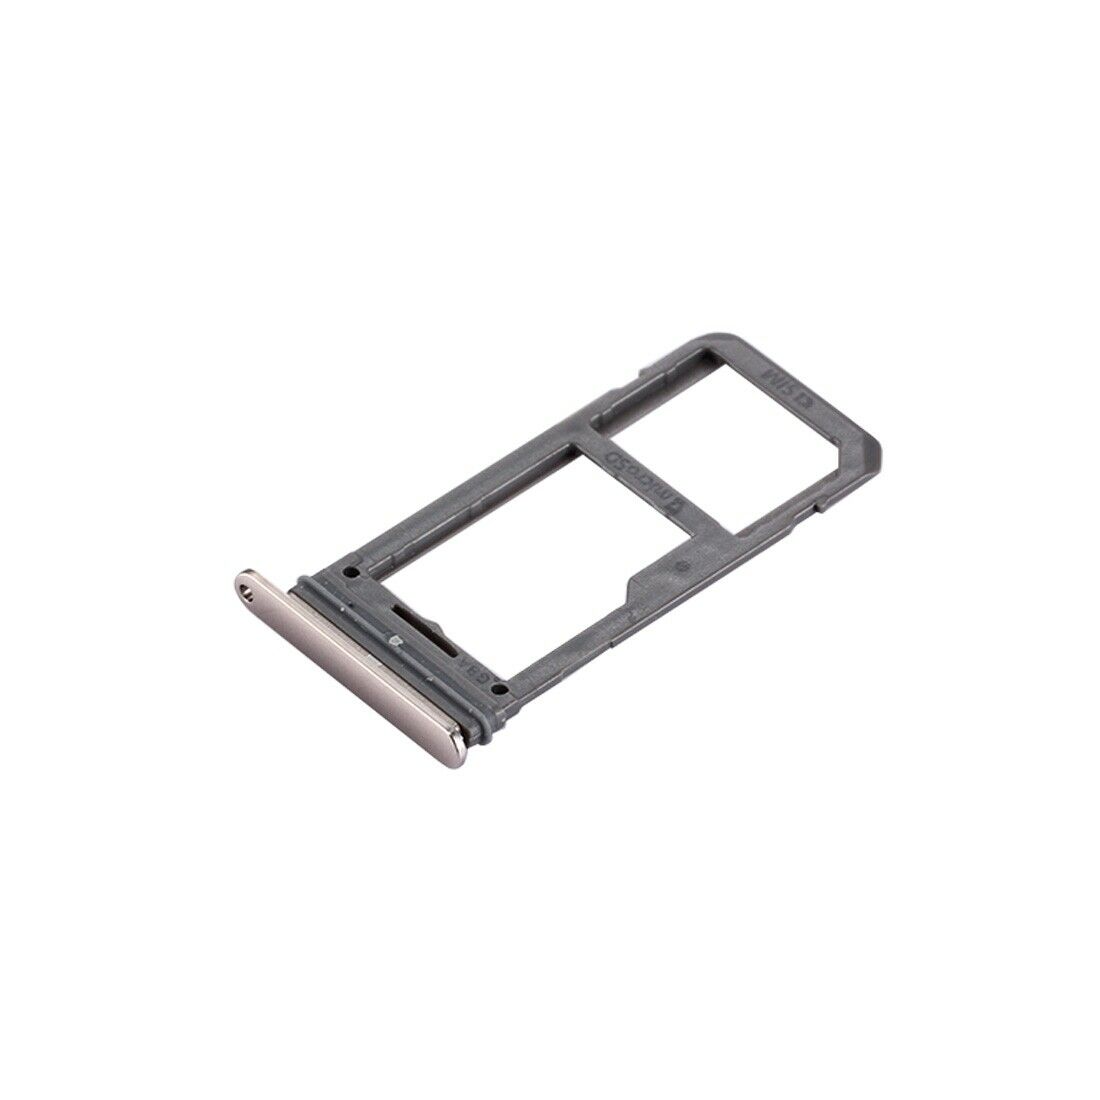 Samsung Galaxy S8 G950 / S8+ Plus G955 SIM & SD Card Tray Holder - Gold for [product_price] - First Help Tech